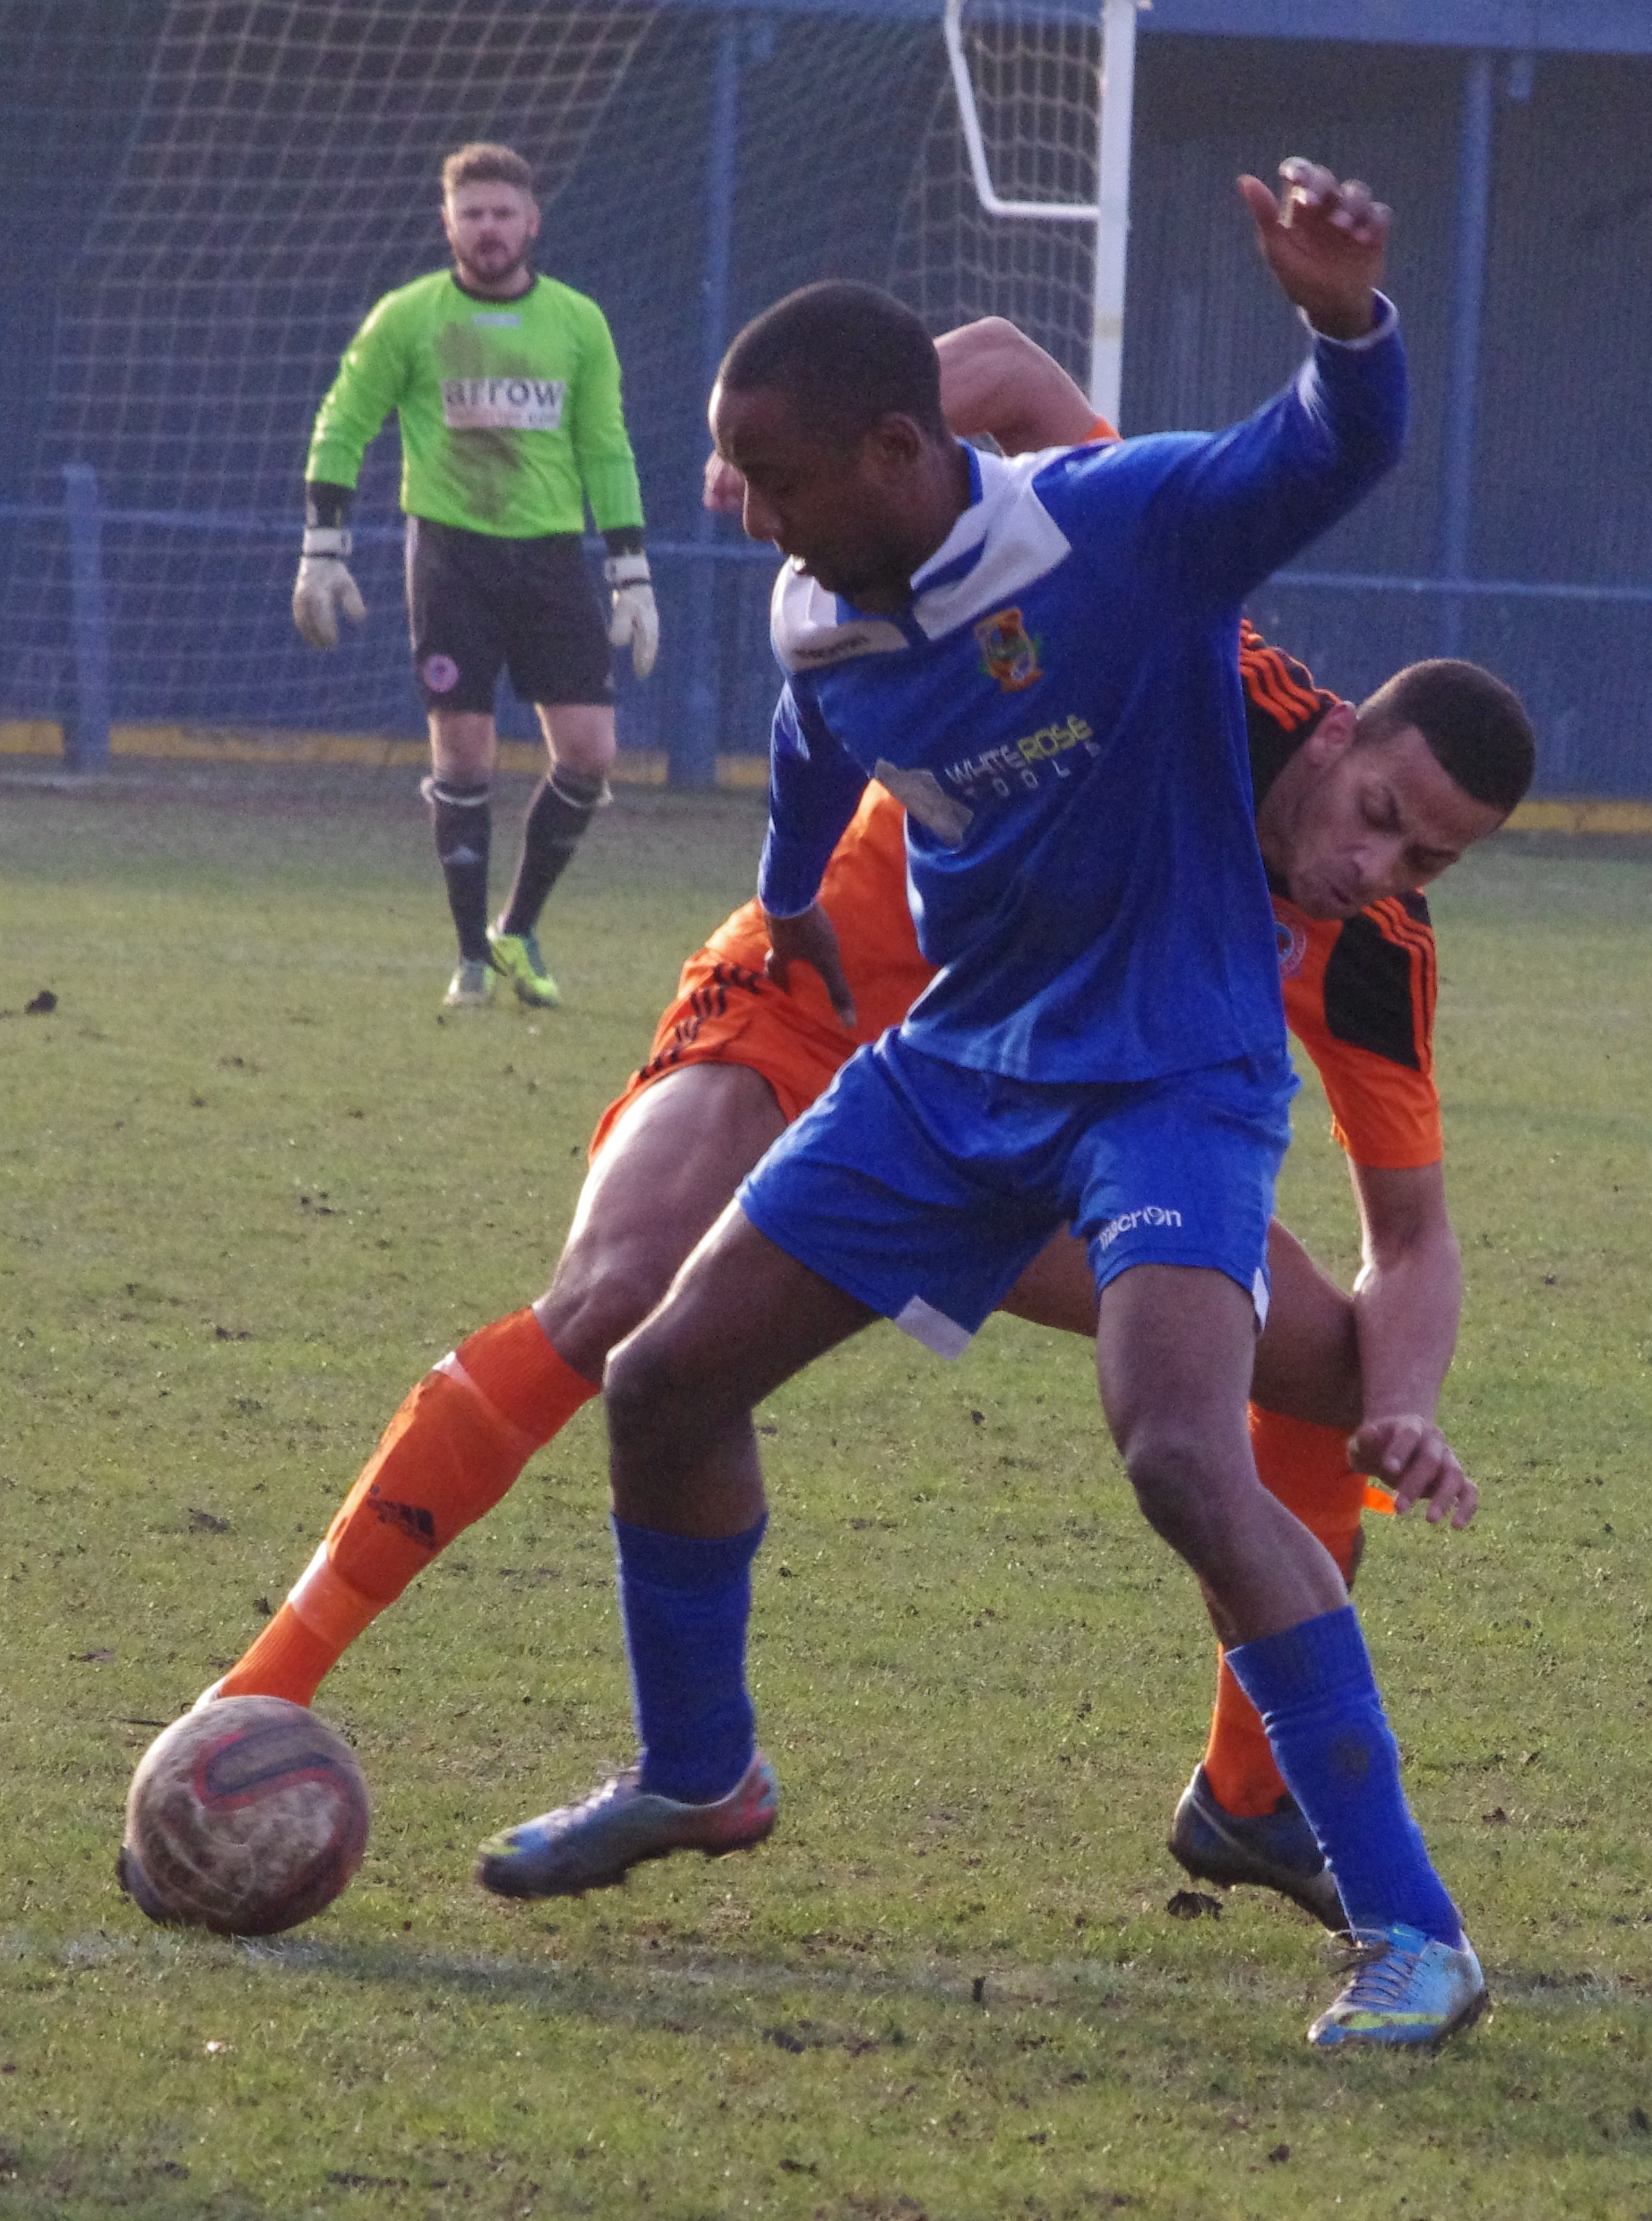 Gareth Grant has left Pontefract and joined Frickley